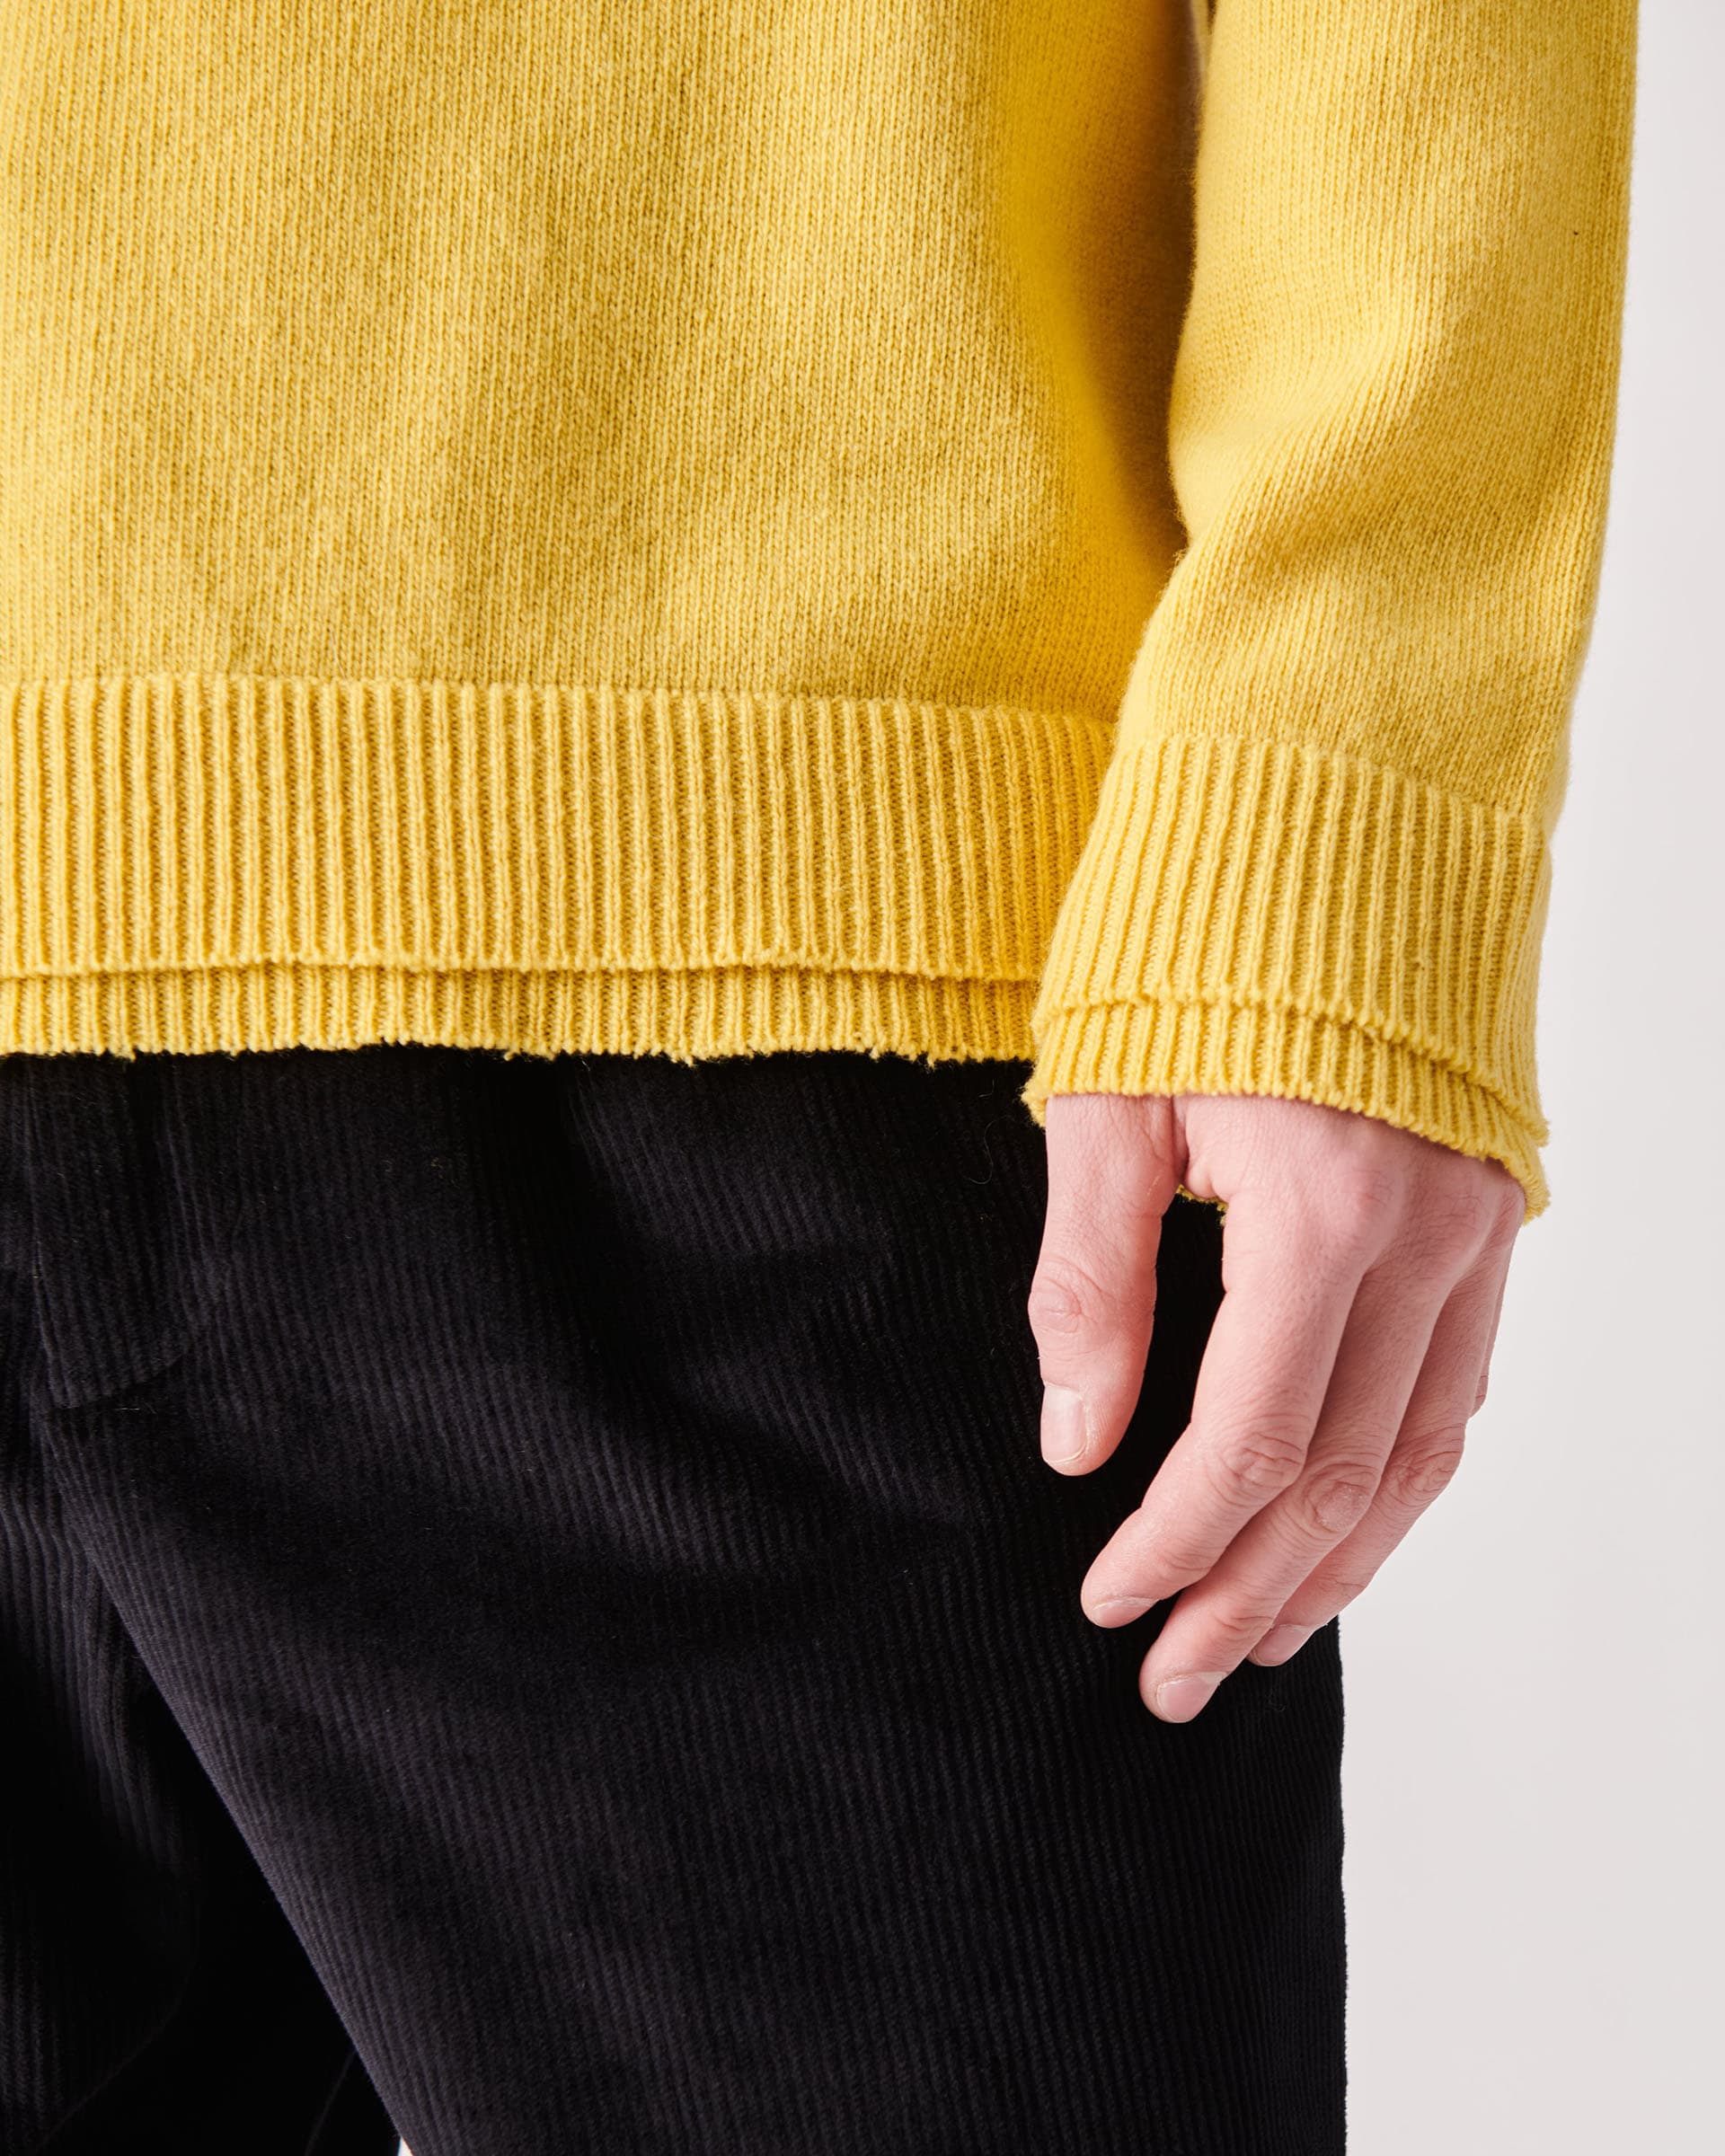 The Market Store | Crew Neck Sweater With Cut Bottoms